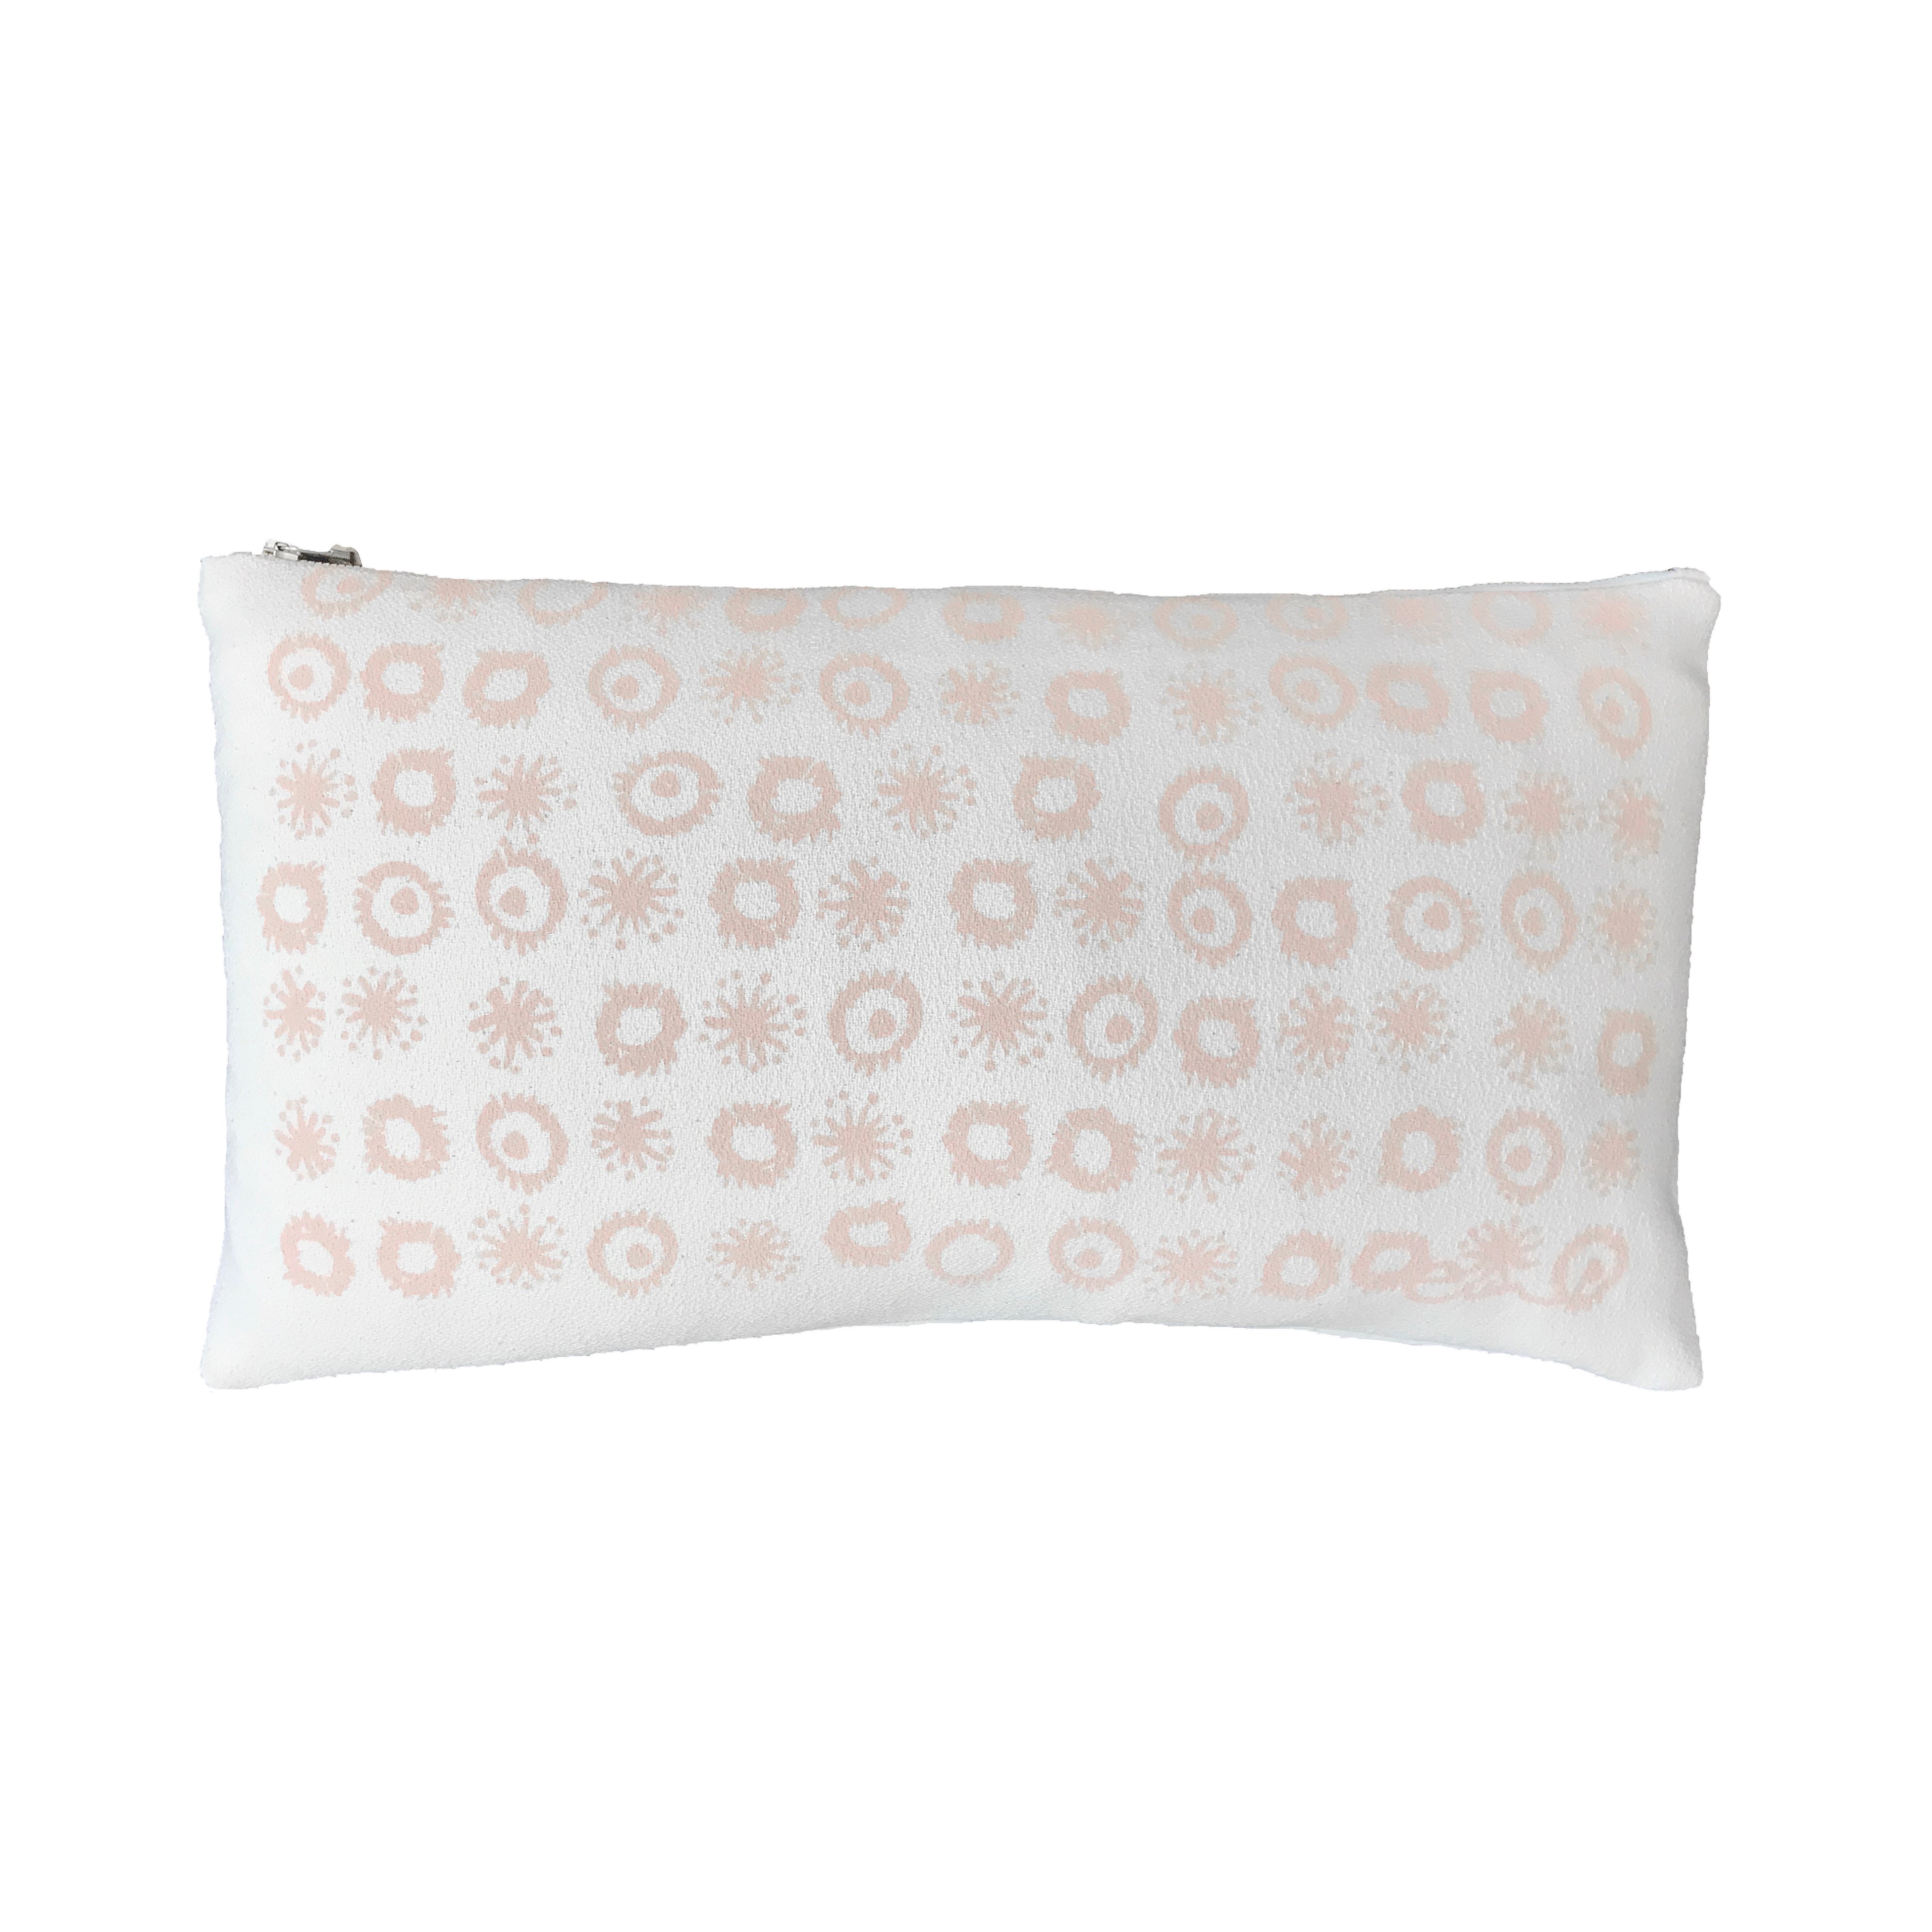 DUSTY PINK FIREWORKS PILLOW